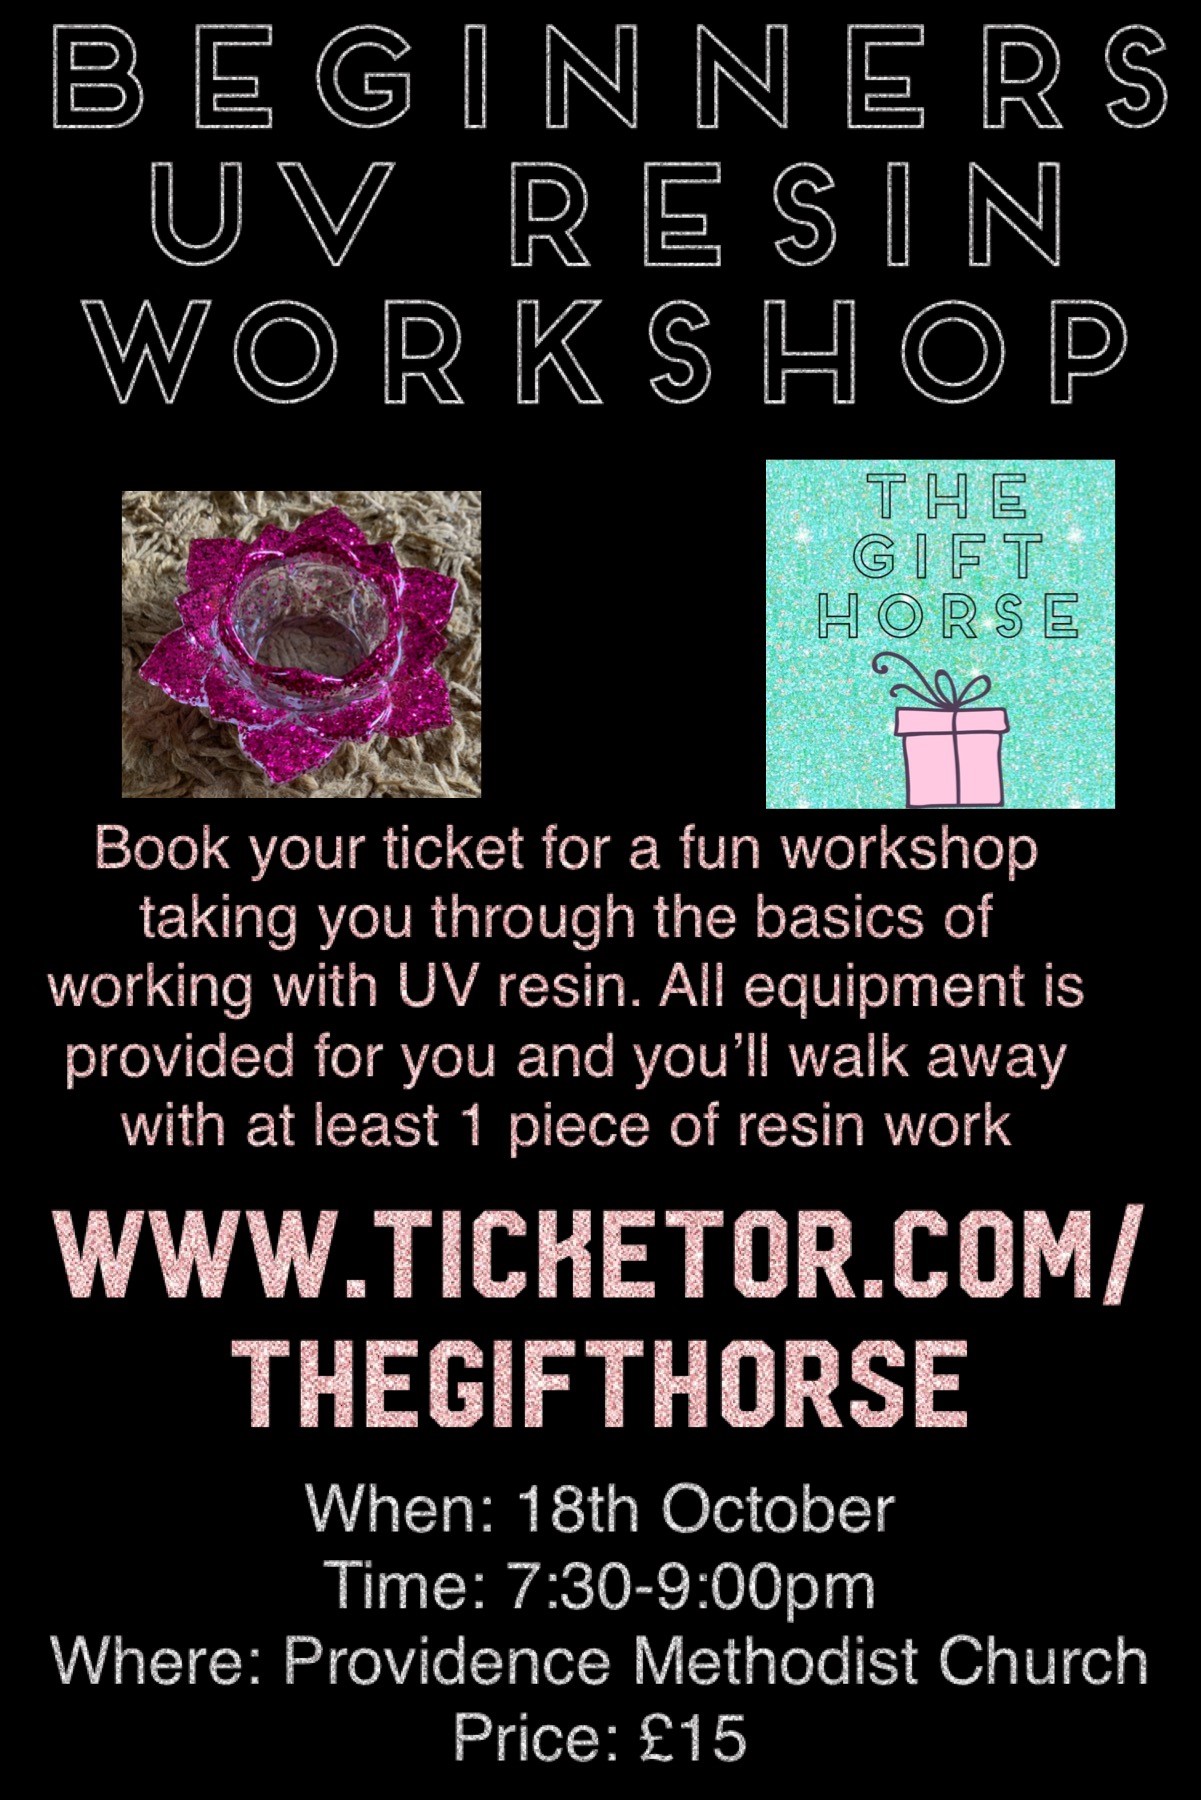 Beginners Resin Workshop  on oct. 18, 19:30@Providence Methodist Church - Buy tickets and Get information on The Gift Horse 